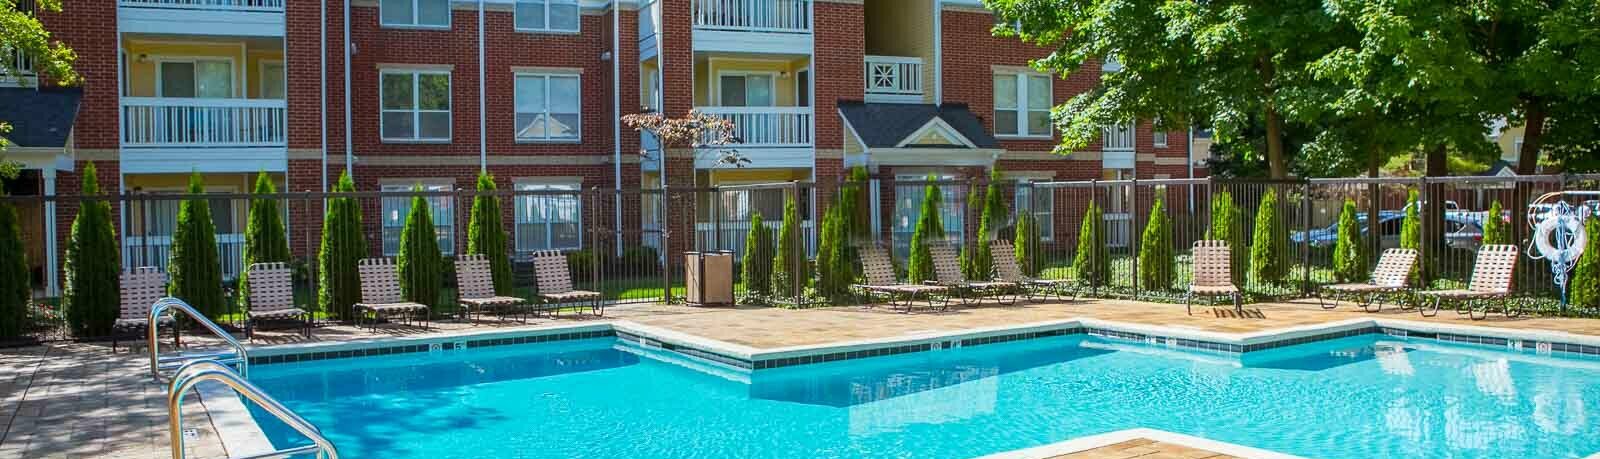 Outdoor pool at the White River Indianapolis apartment complex.